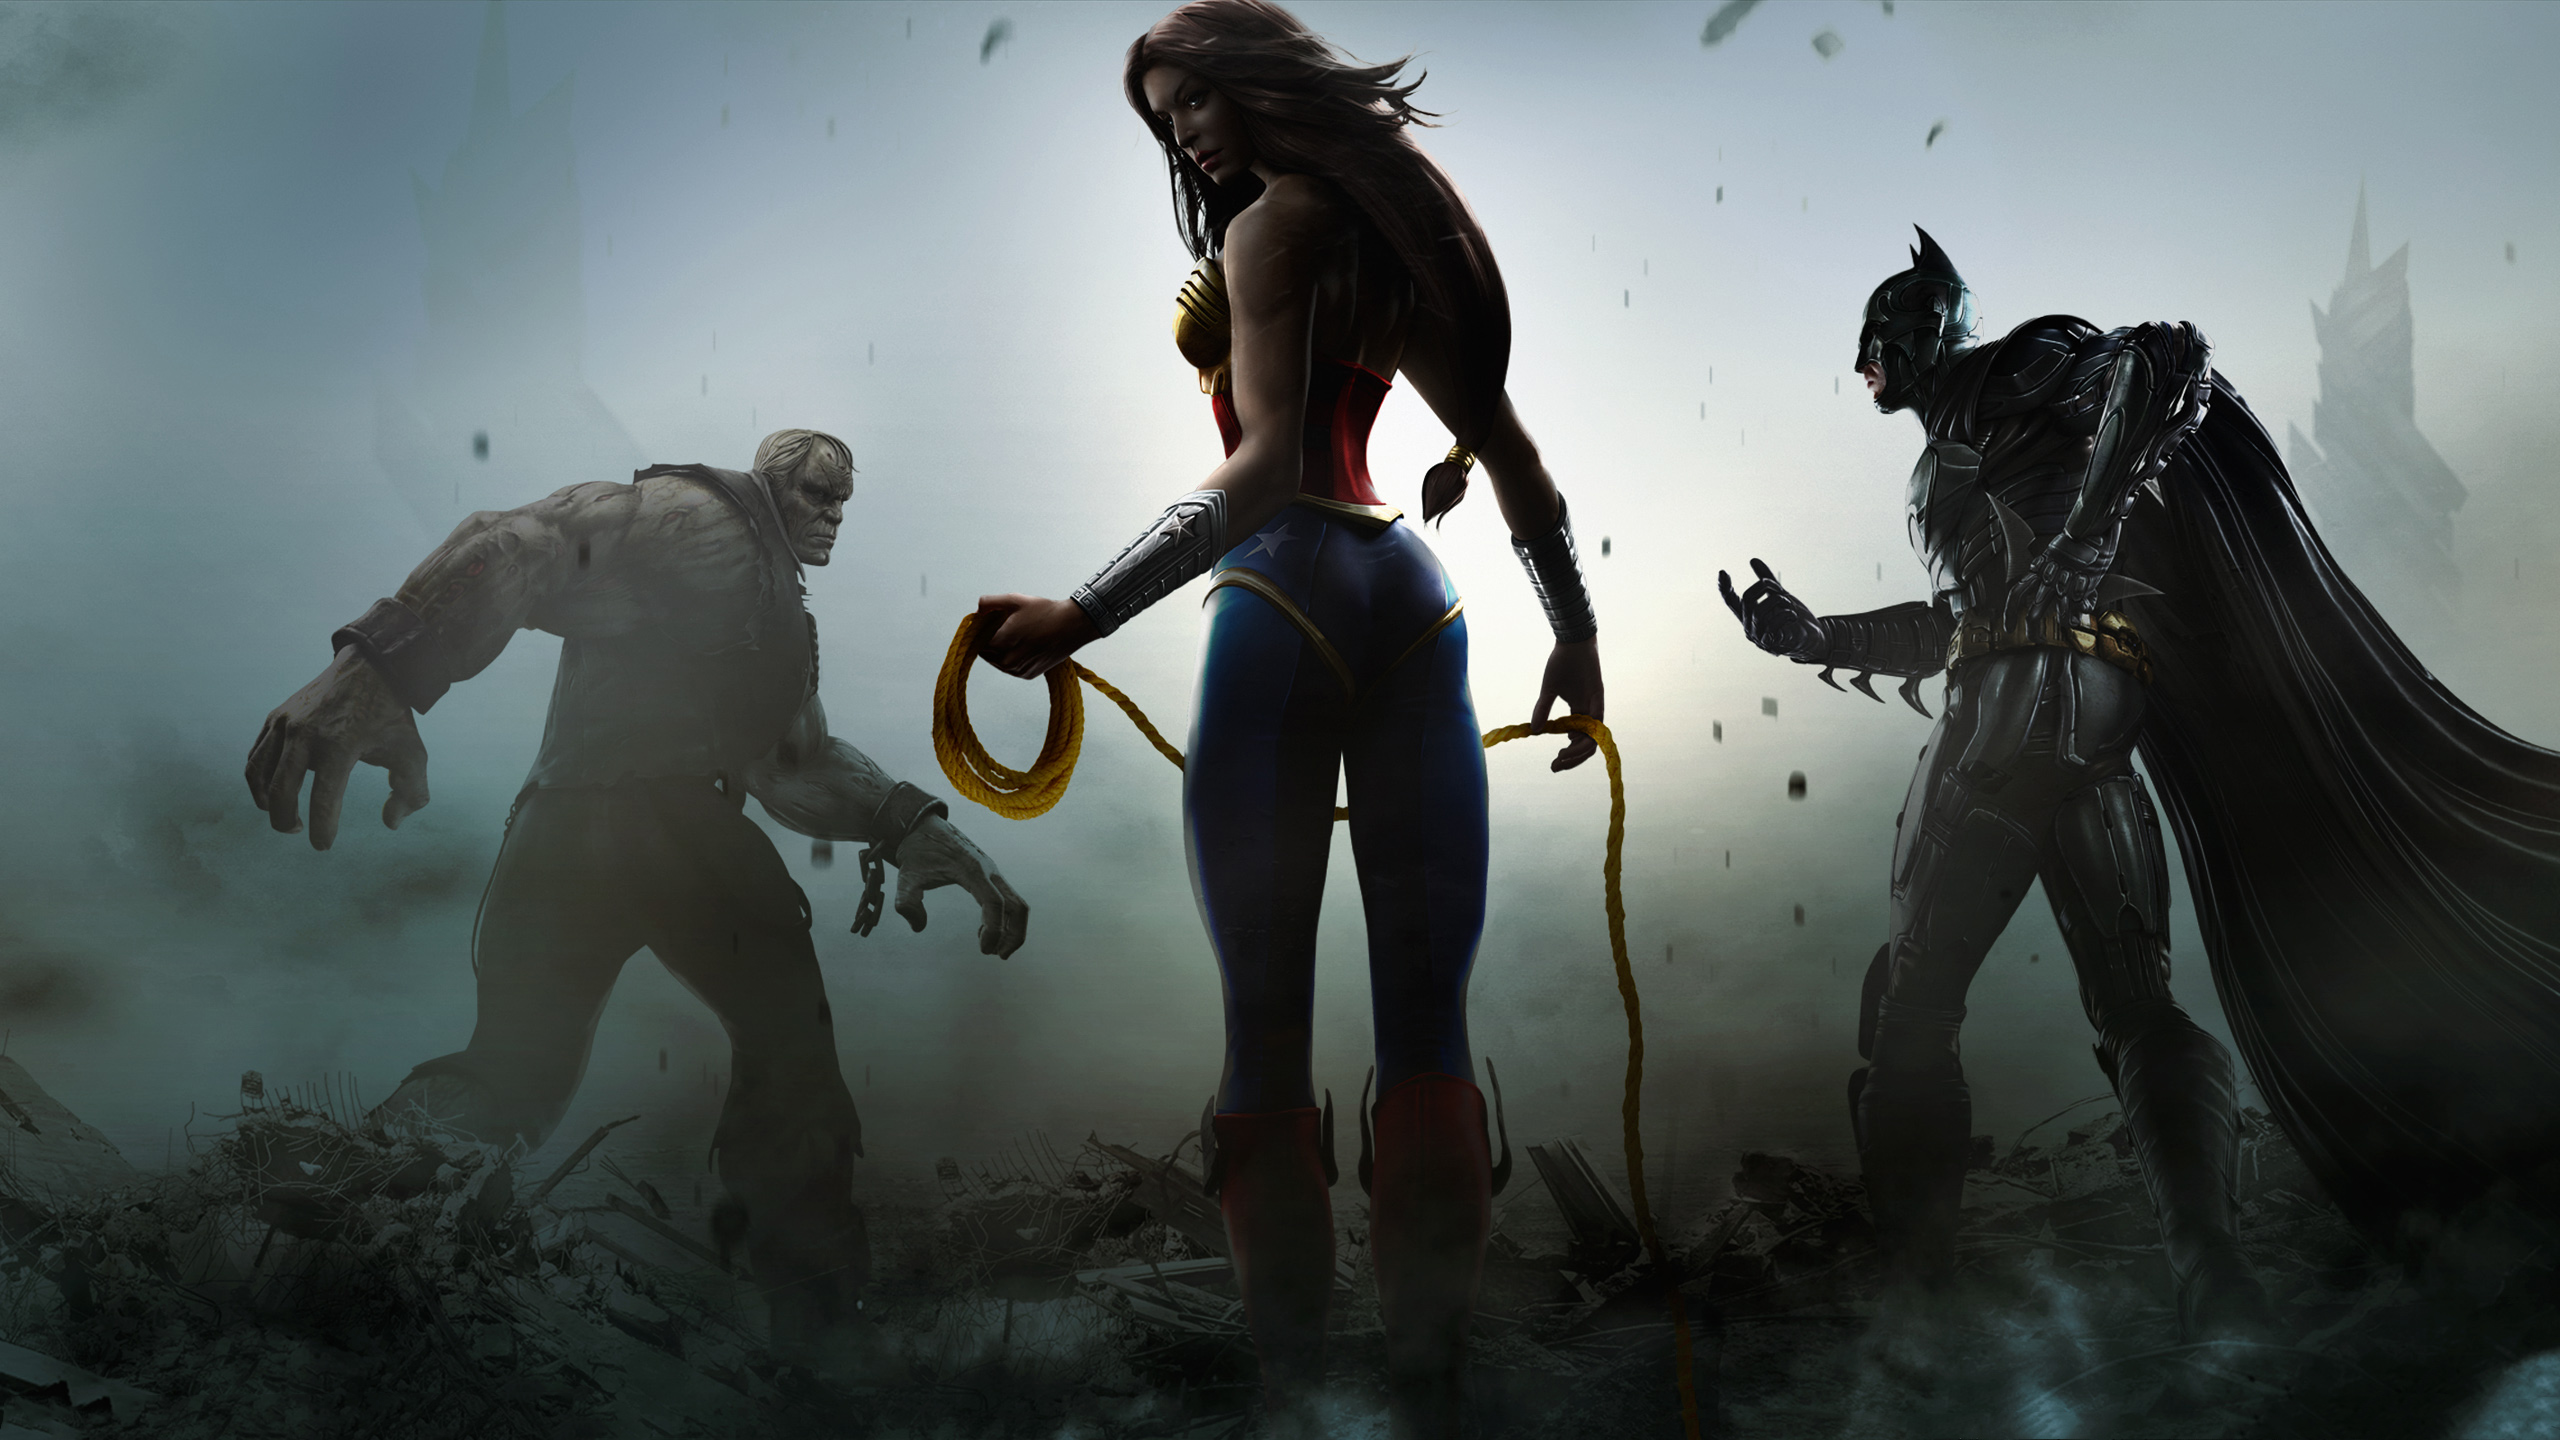 Solomon Grundy Wonder Woman And Batman In Injustice Gods Among Us Hd Games 4k Wallpapers Images Backgrounds Photos And Pictures